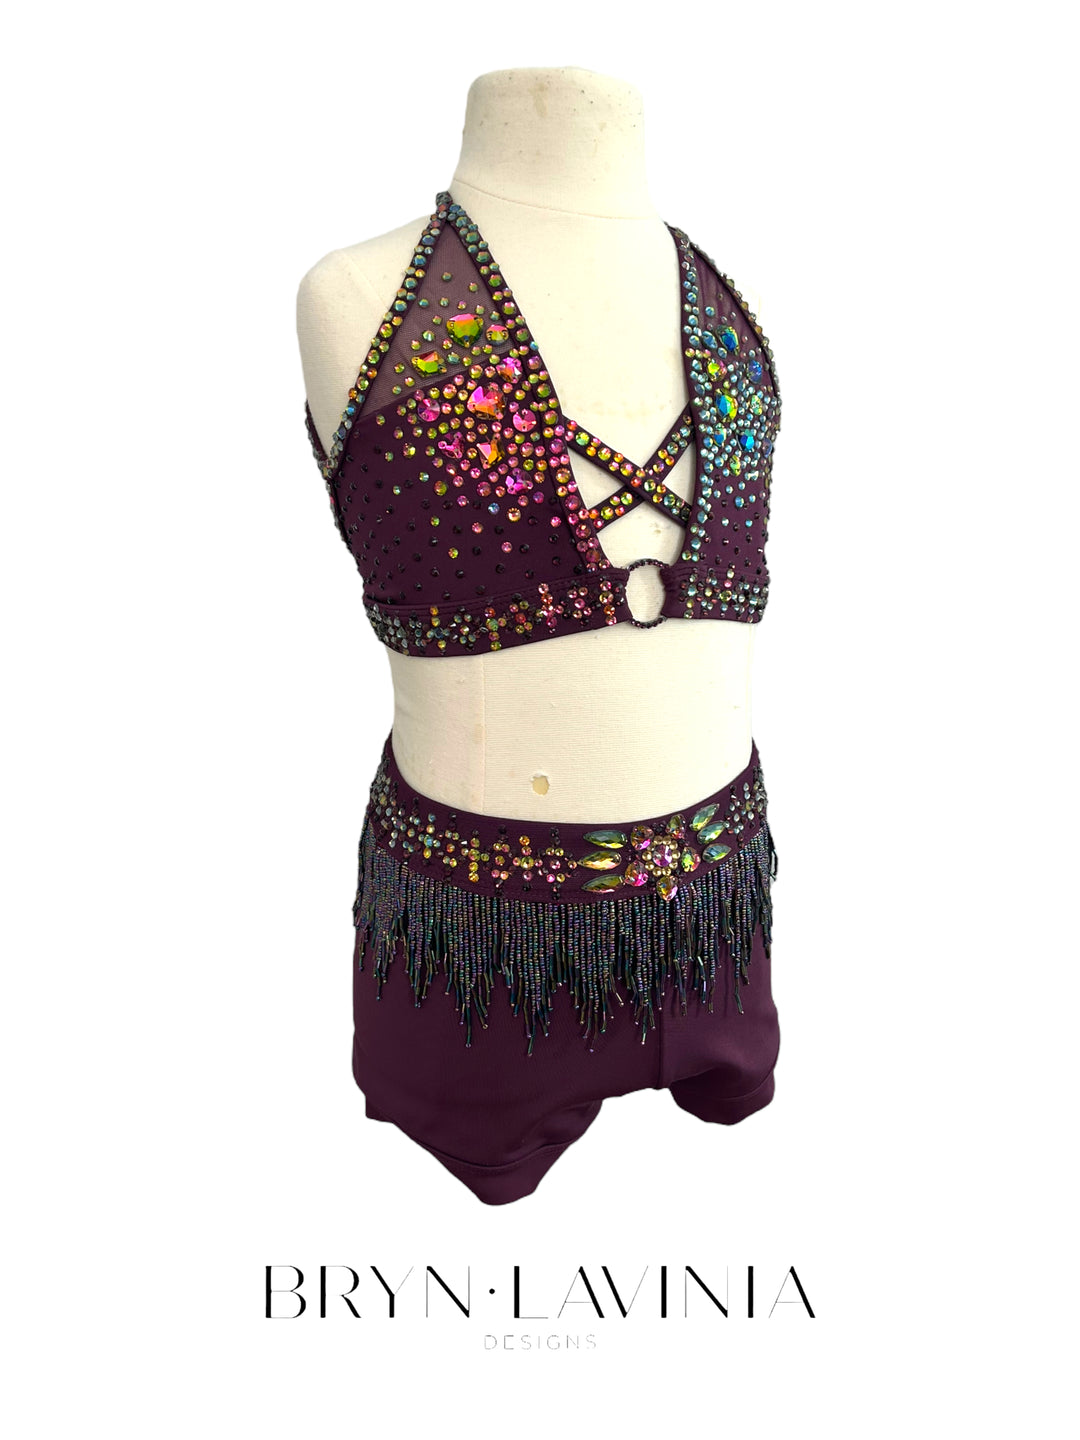 NEW CL Plum ready to ship costume